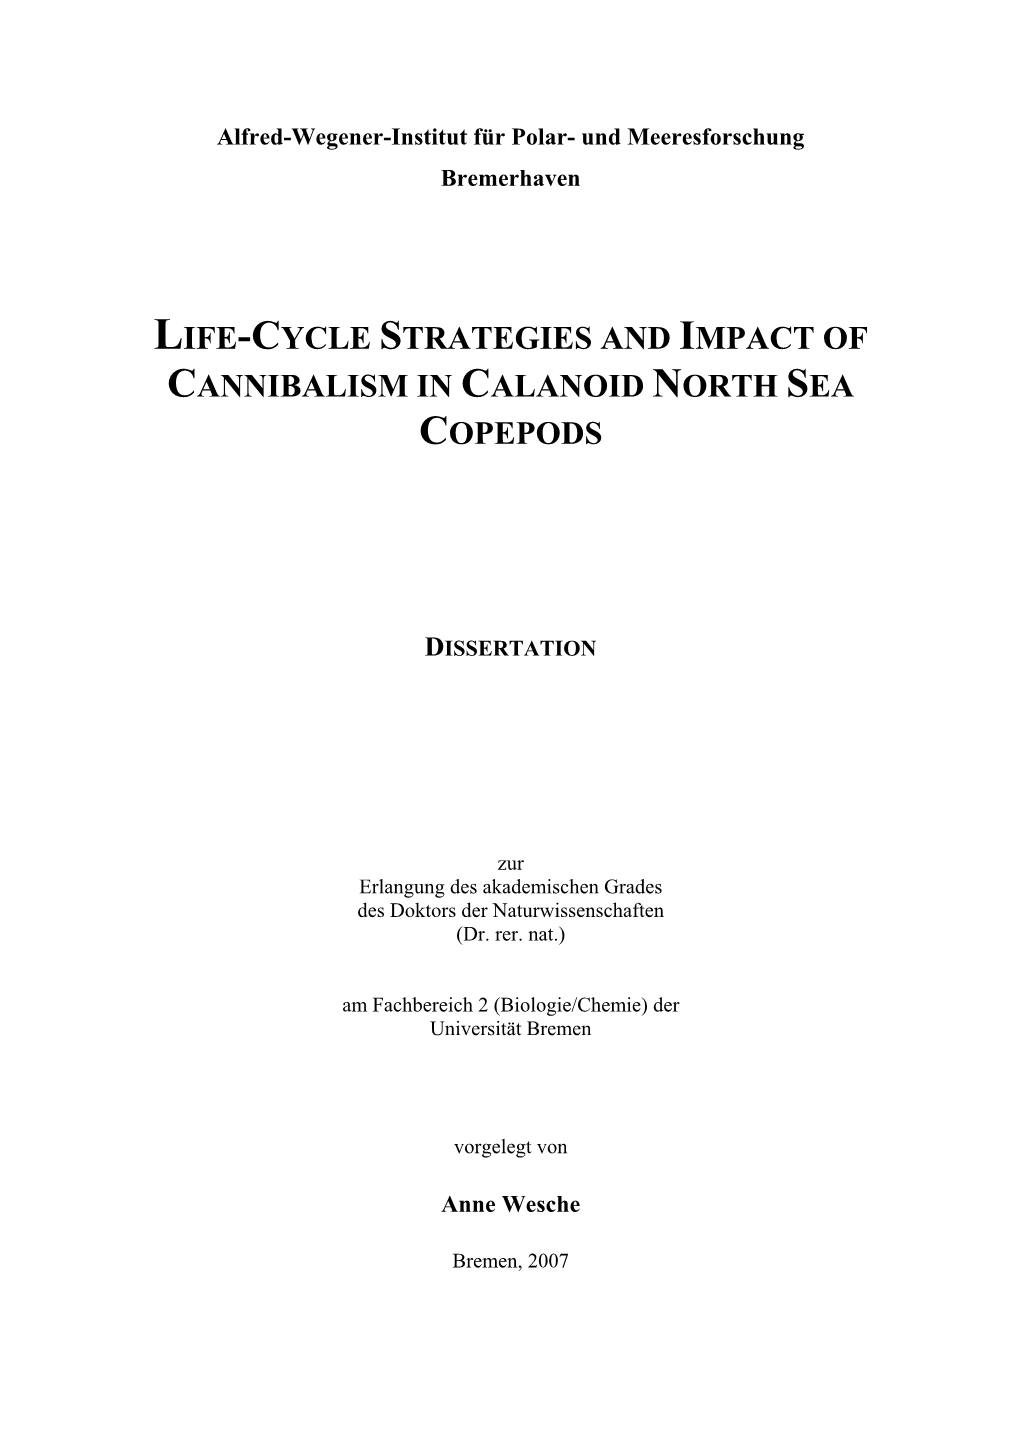 Life-Cycle Strategies and Impact of Cannibalism in Calanoid North Sea Copepods